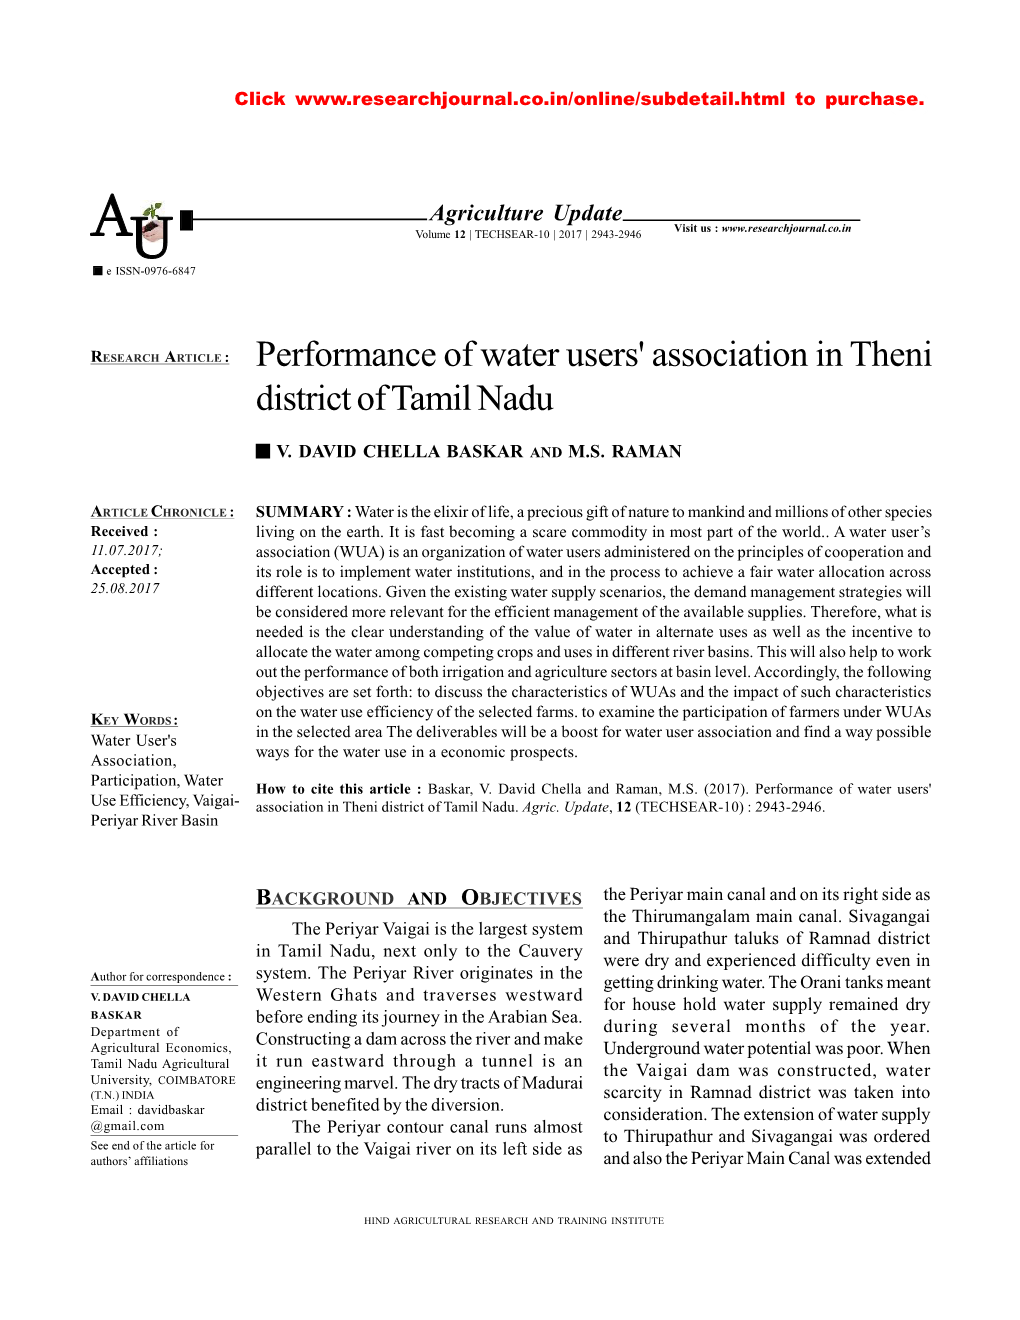 Performance of Water Users' Association in Theni District of Tamil Nadu